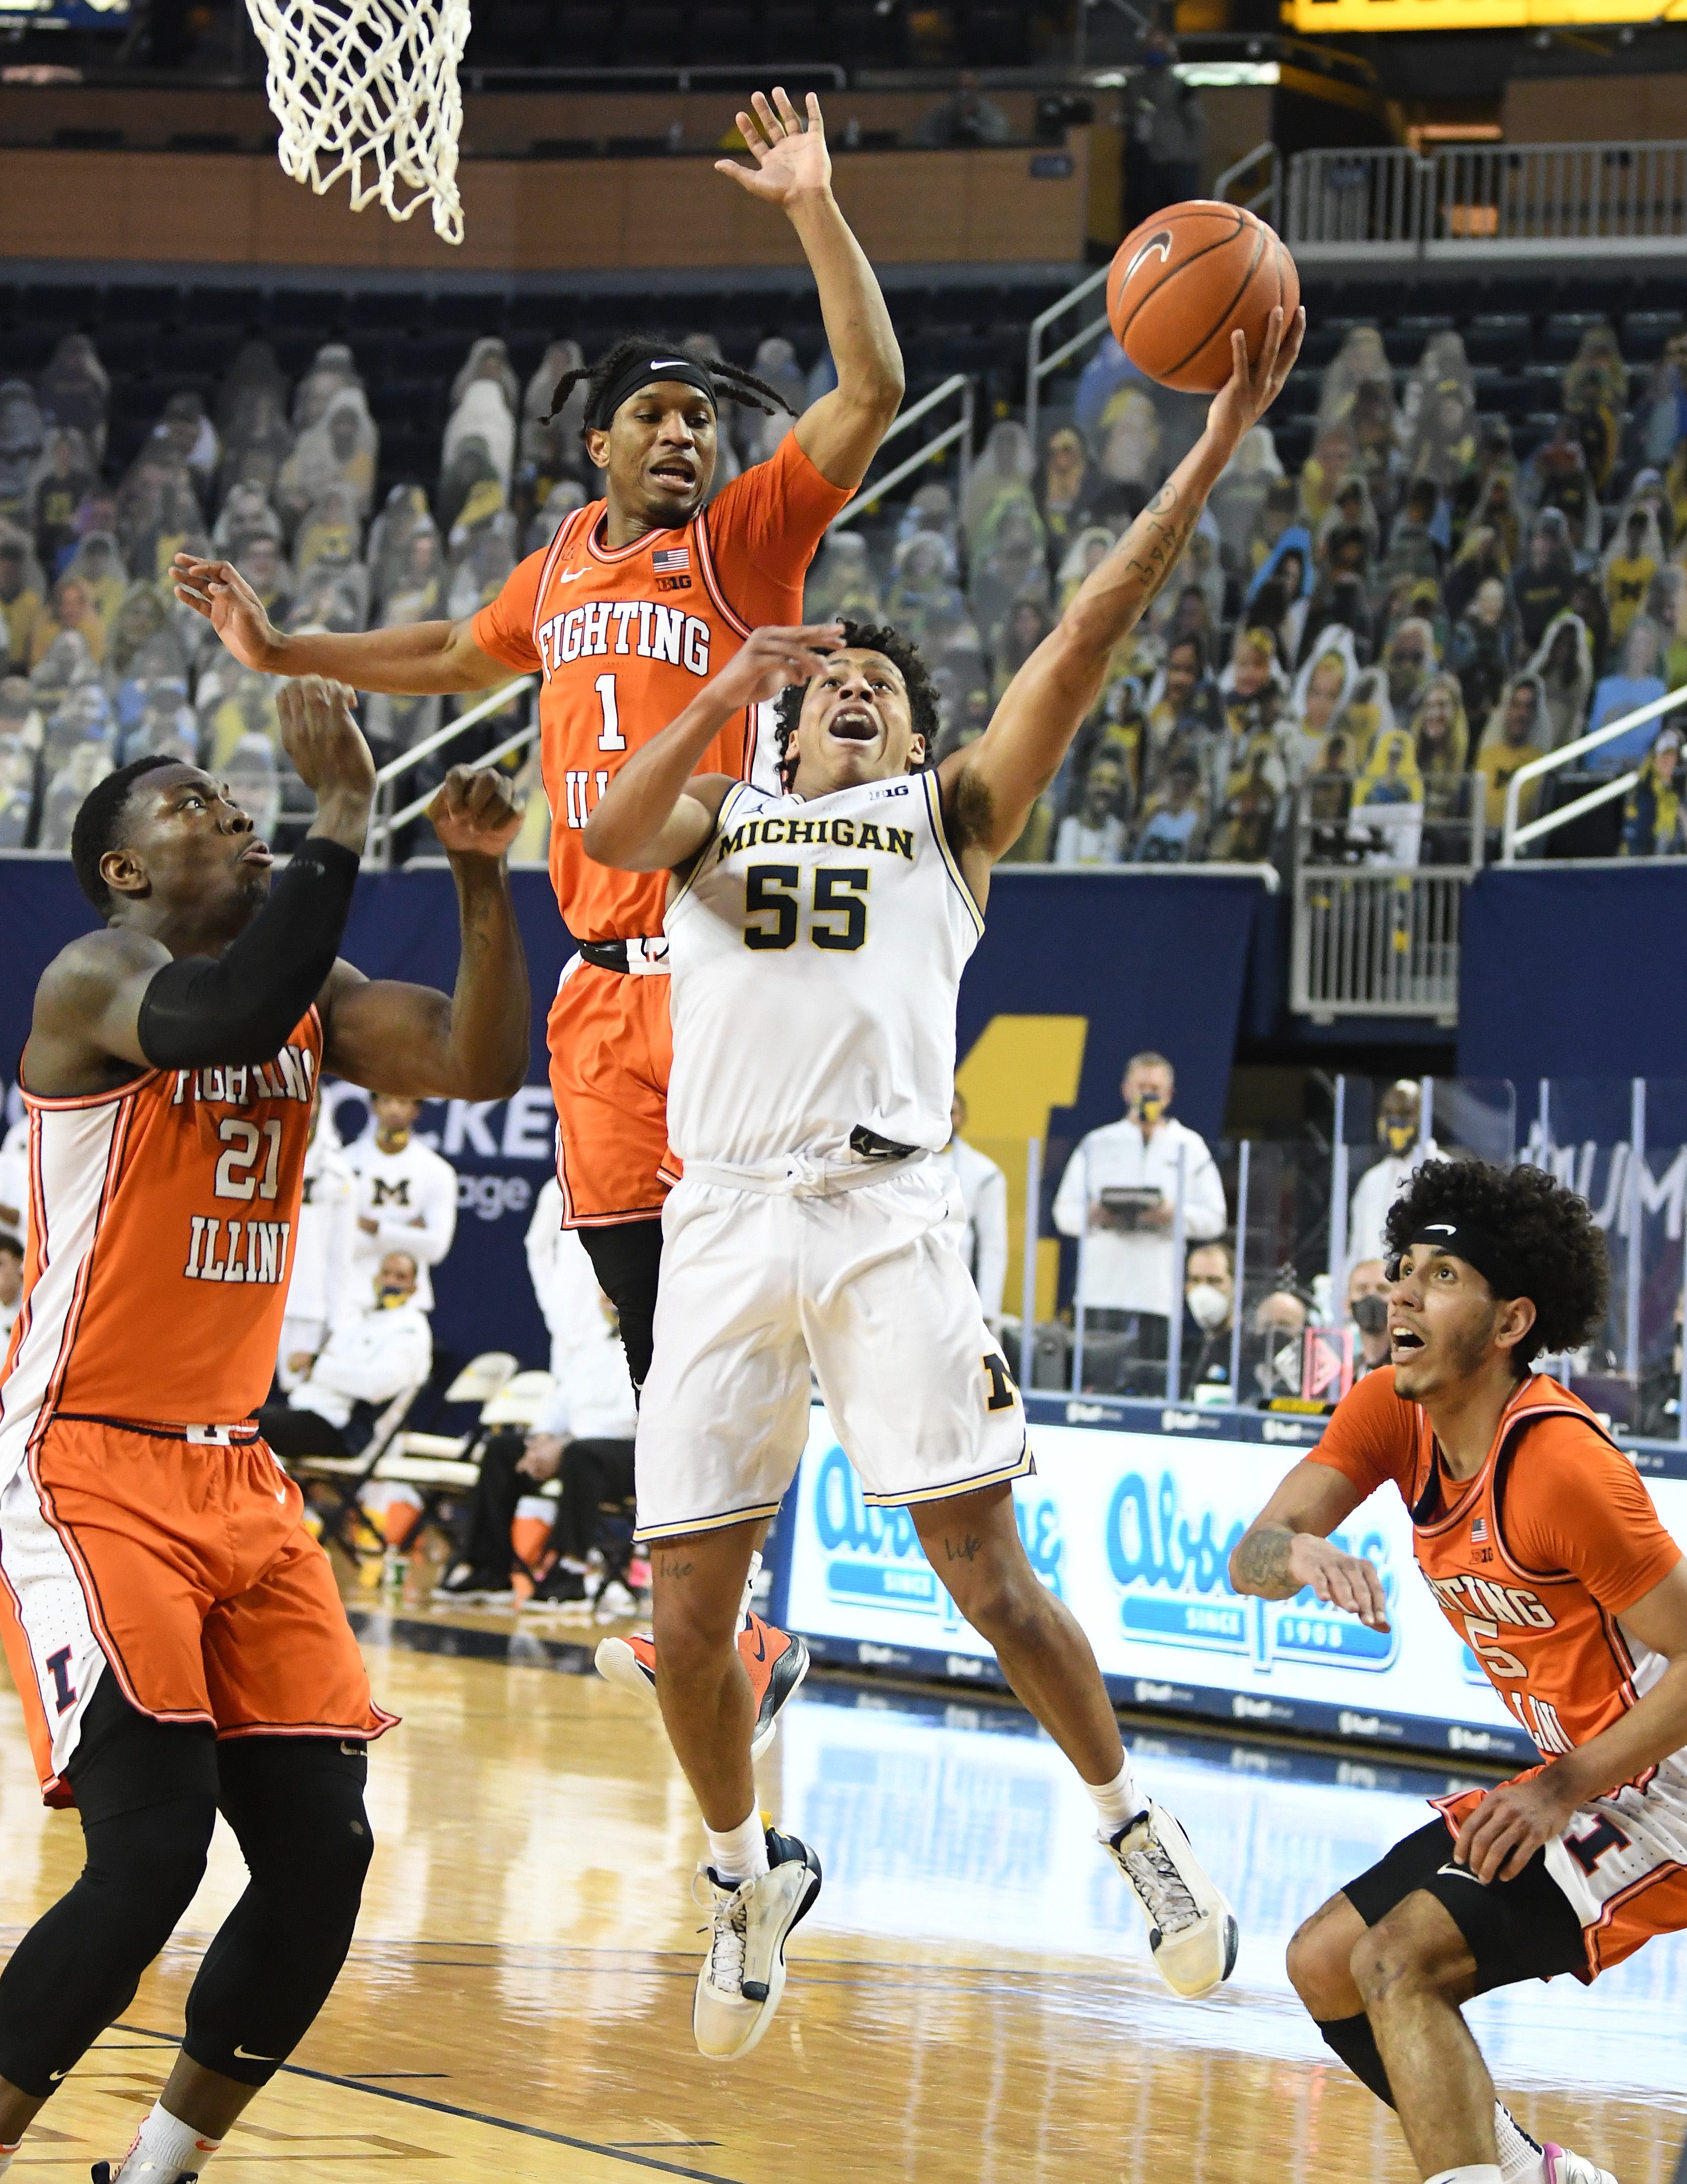 Michigan's Ei Brooks drives to the basket against Illinois' defense in the first half.